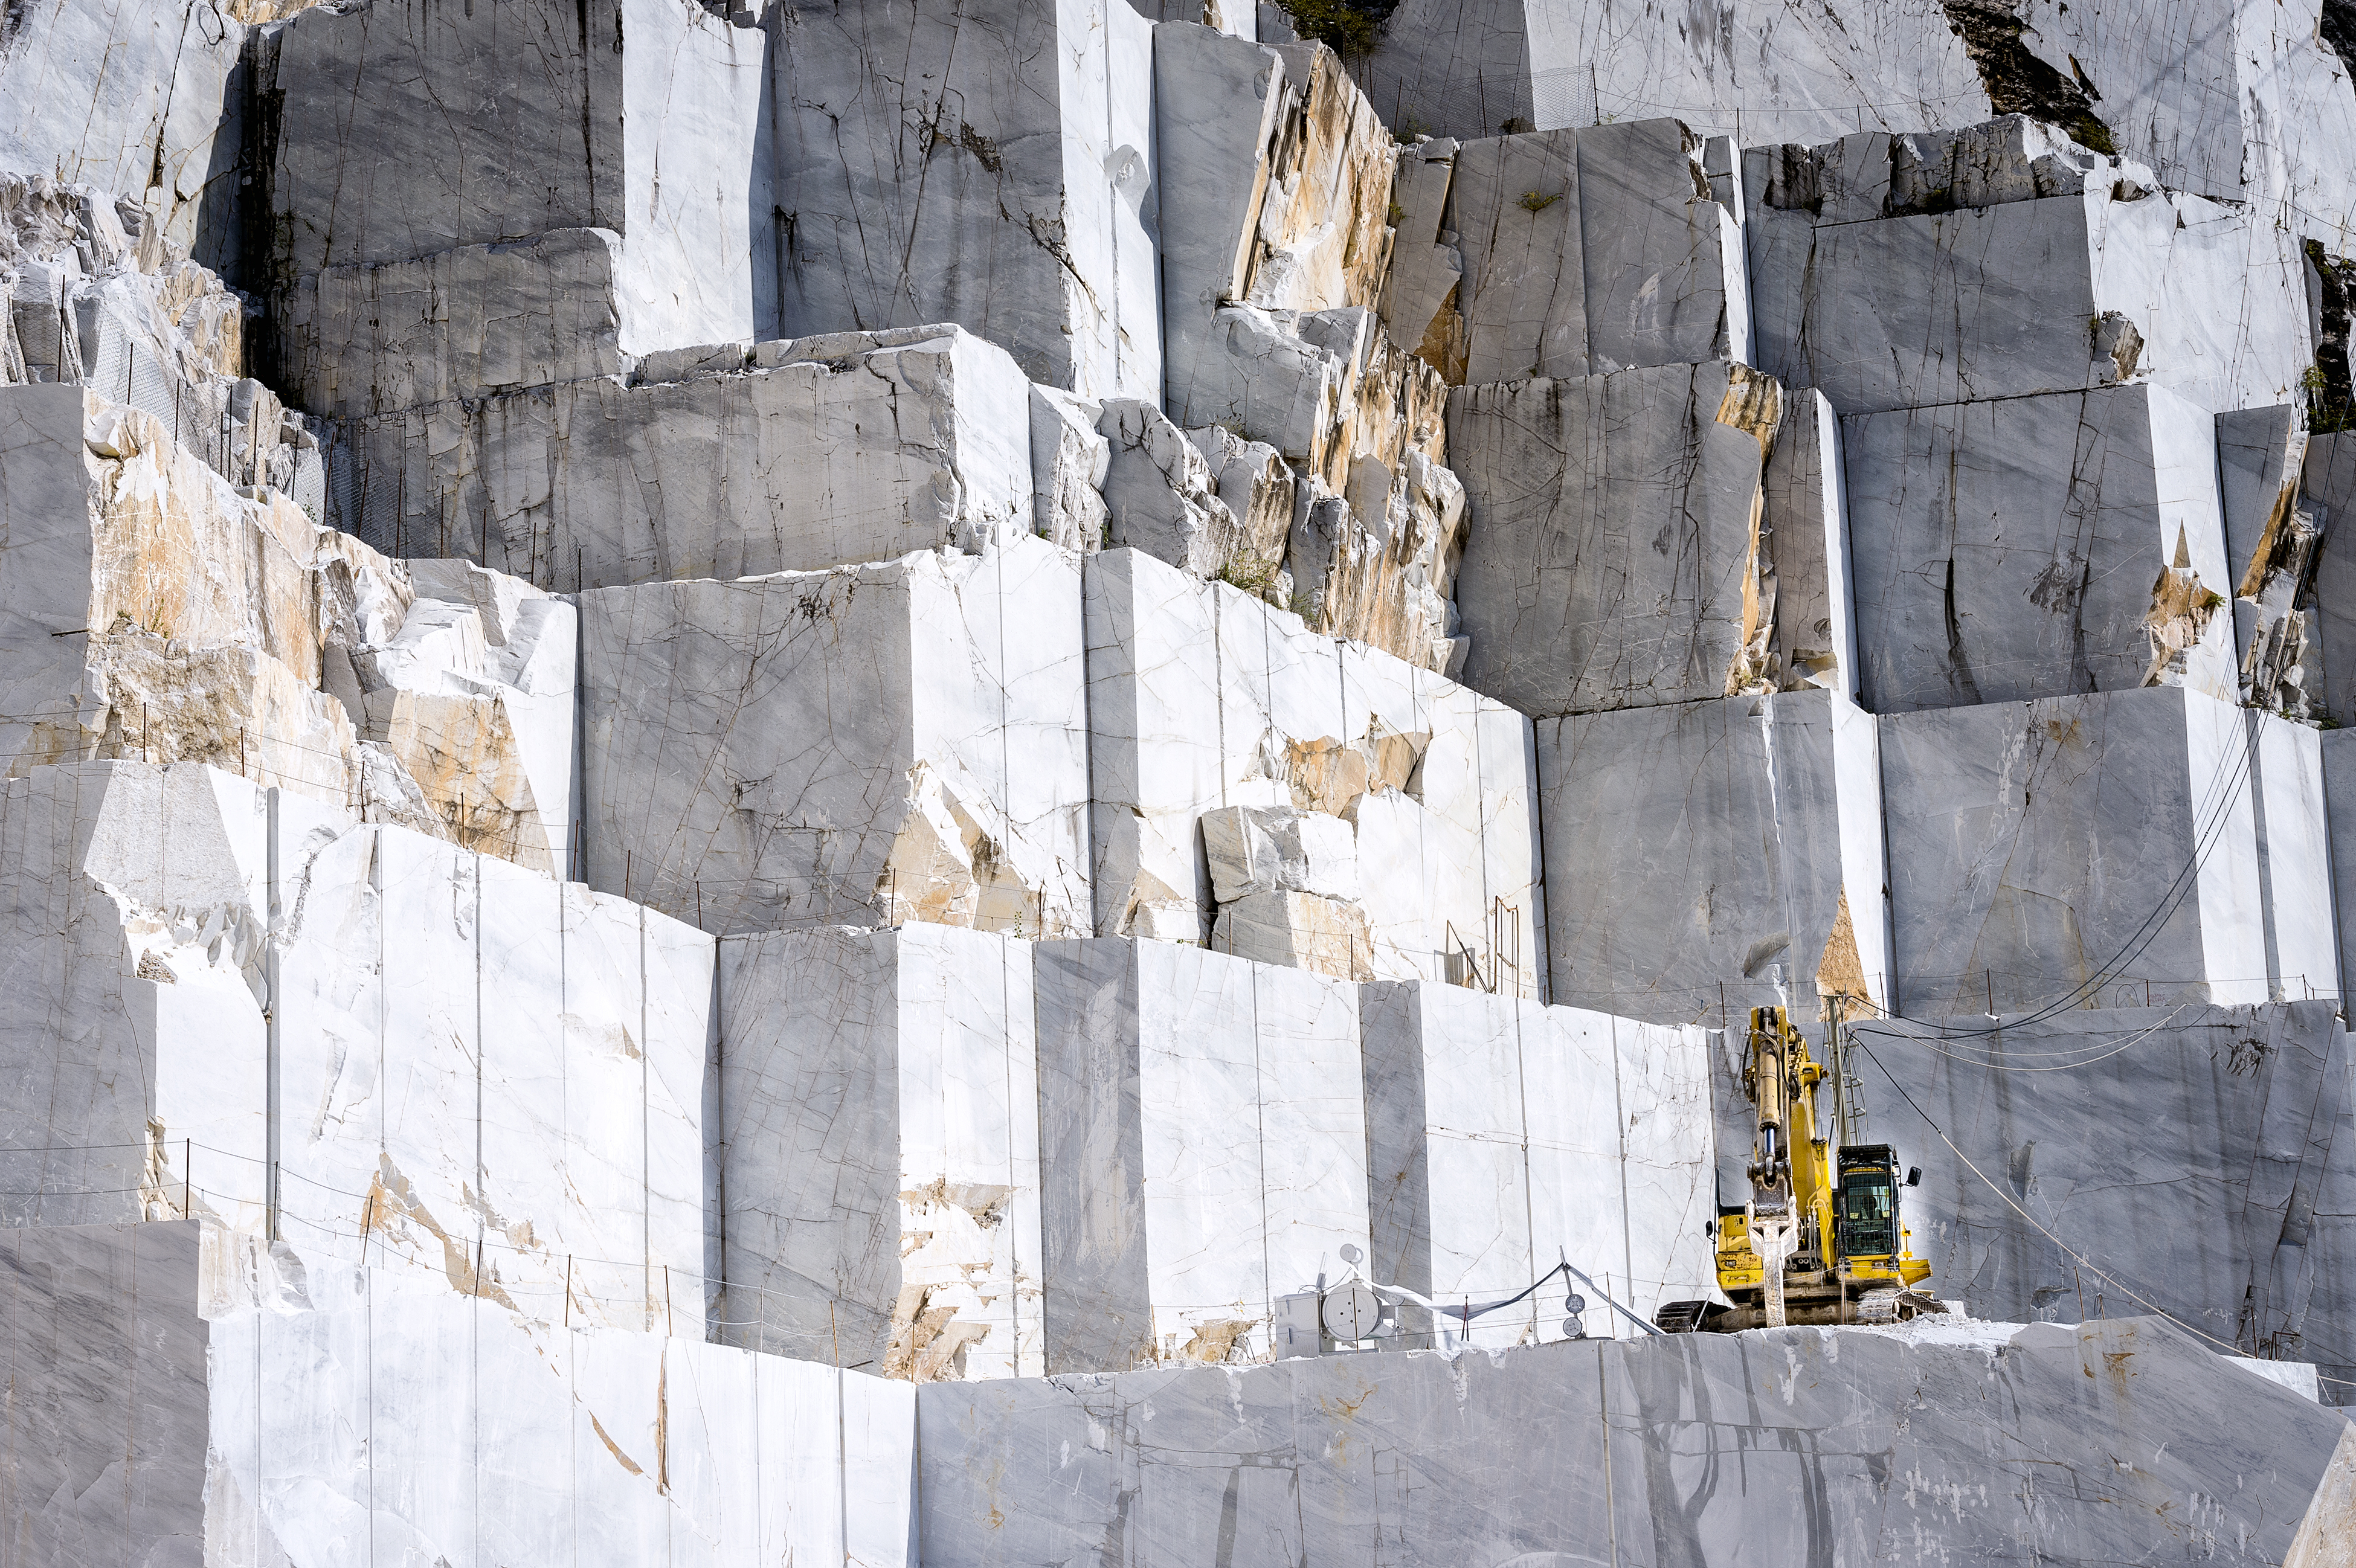 Opustone Natural Stone - From mountainside to tile and slabs